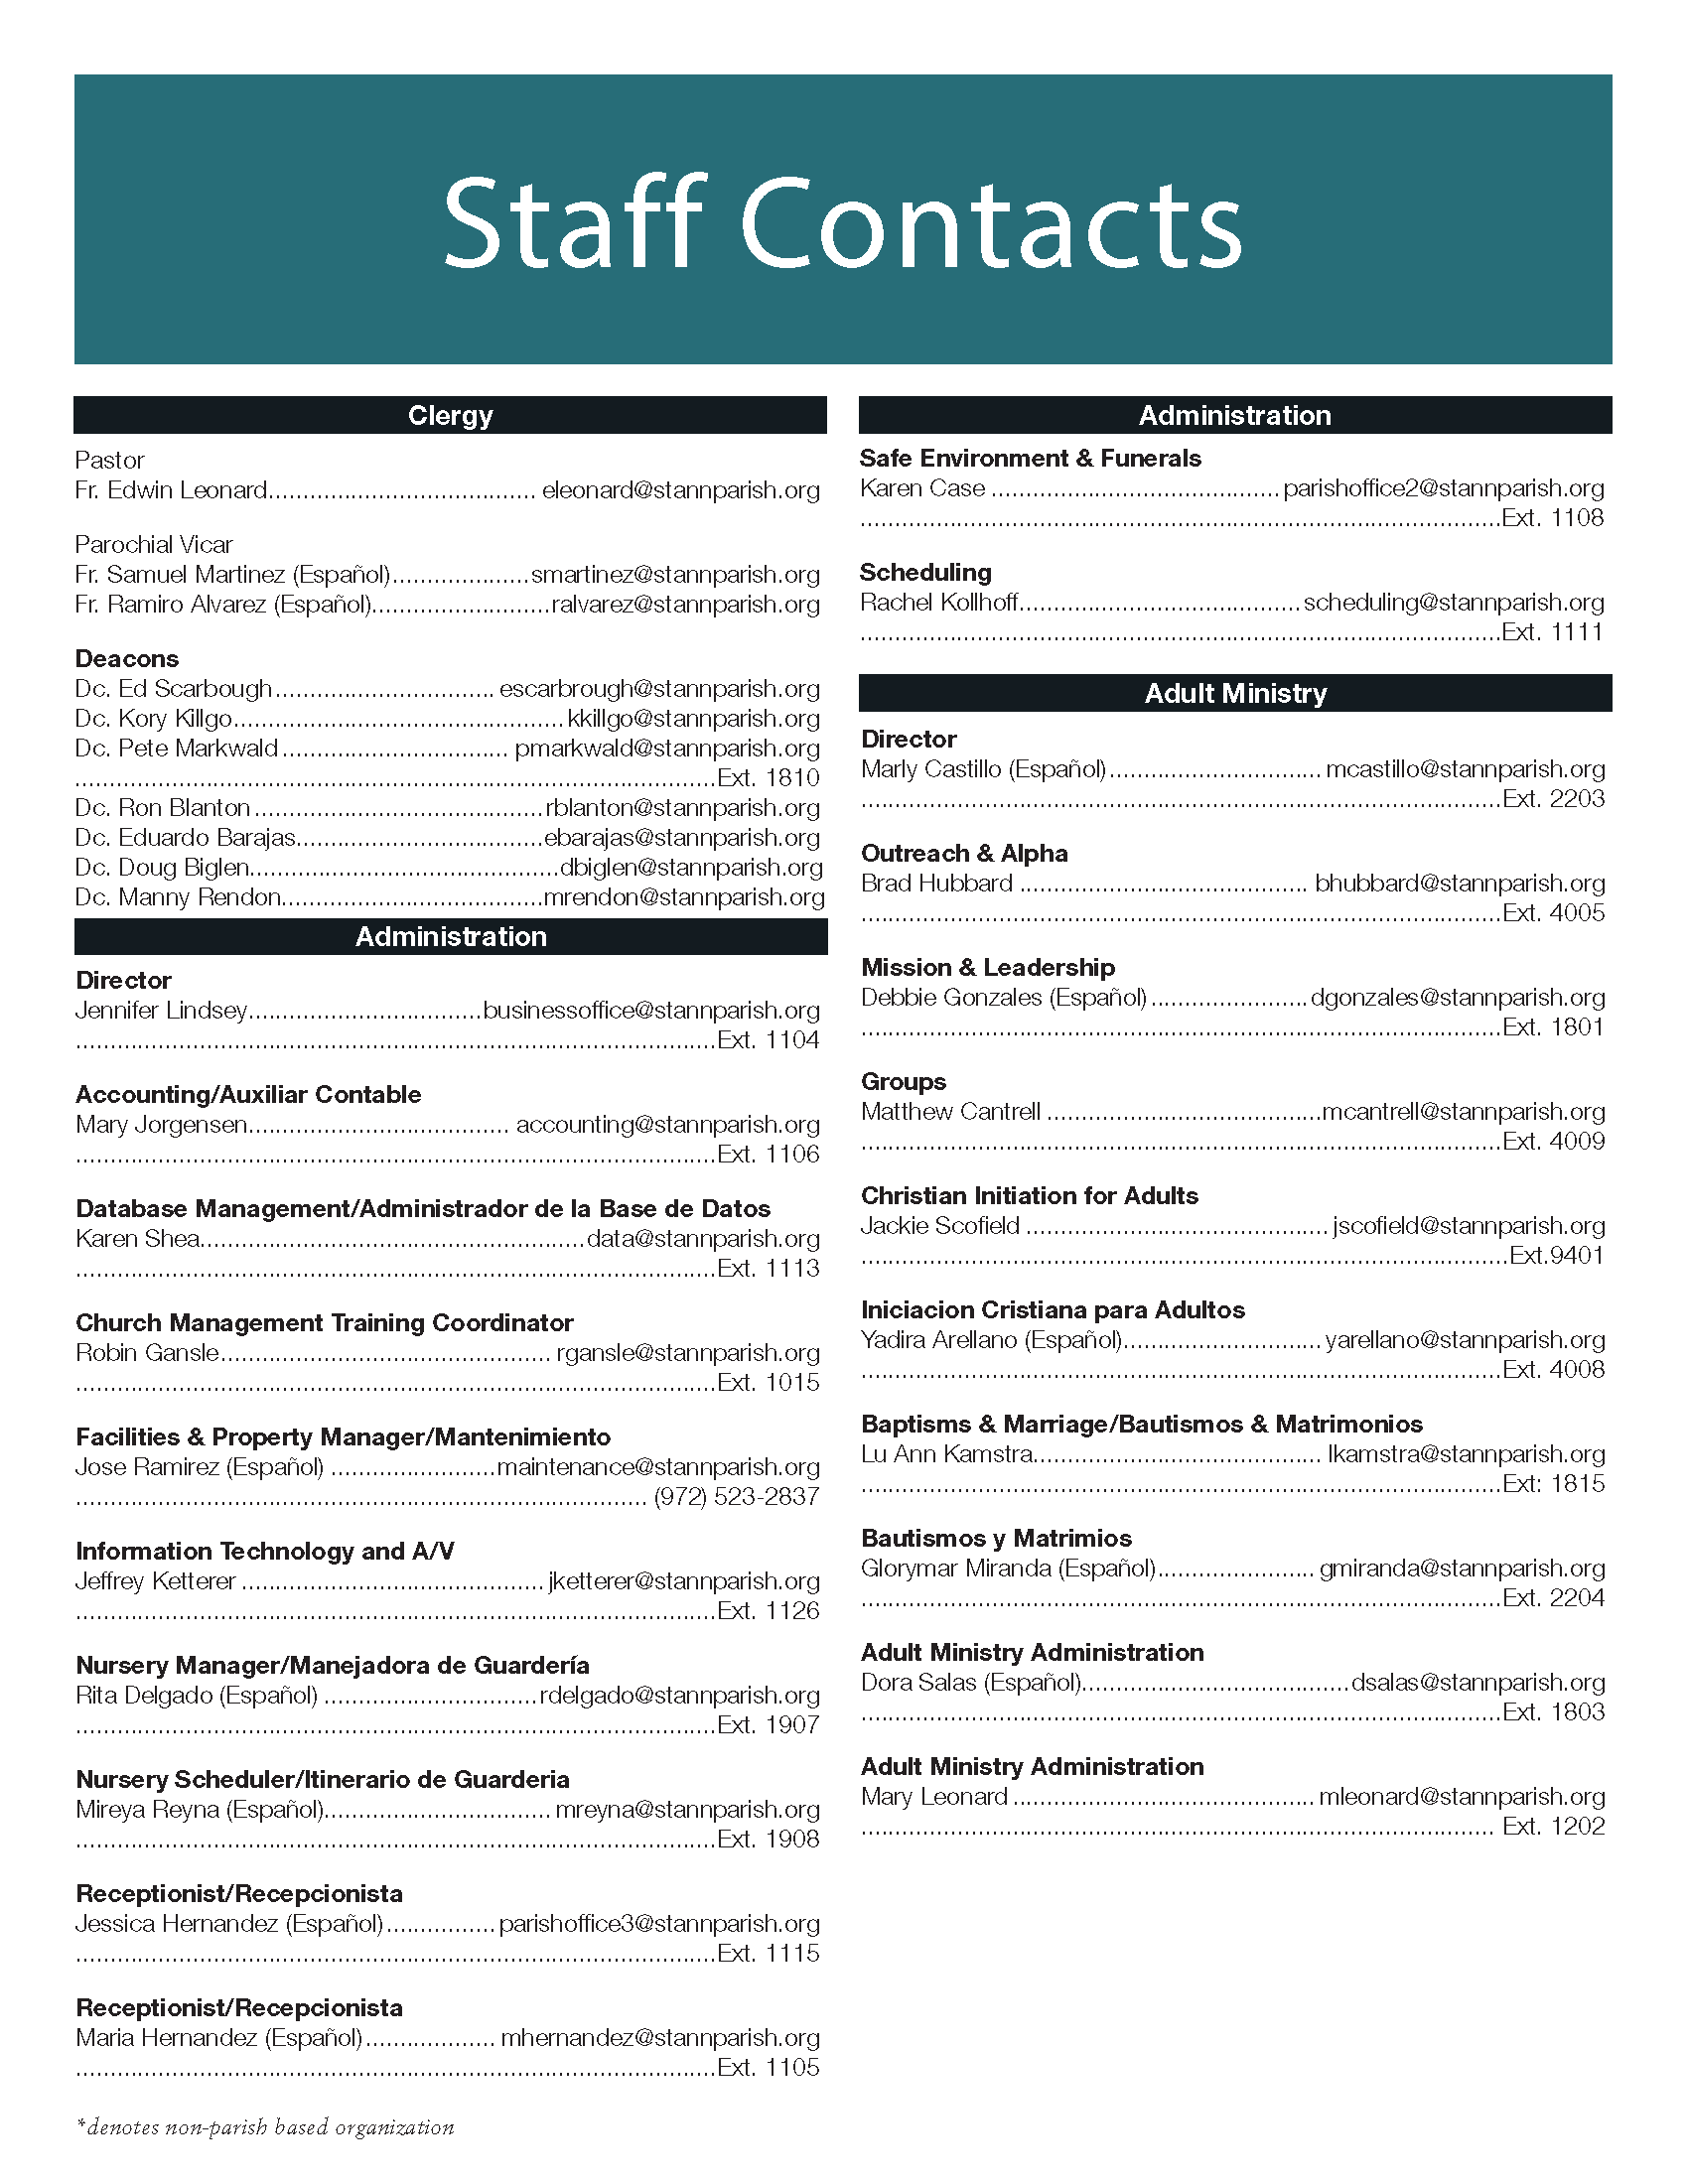 Staff & Ministry Directory_Page_1.png